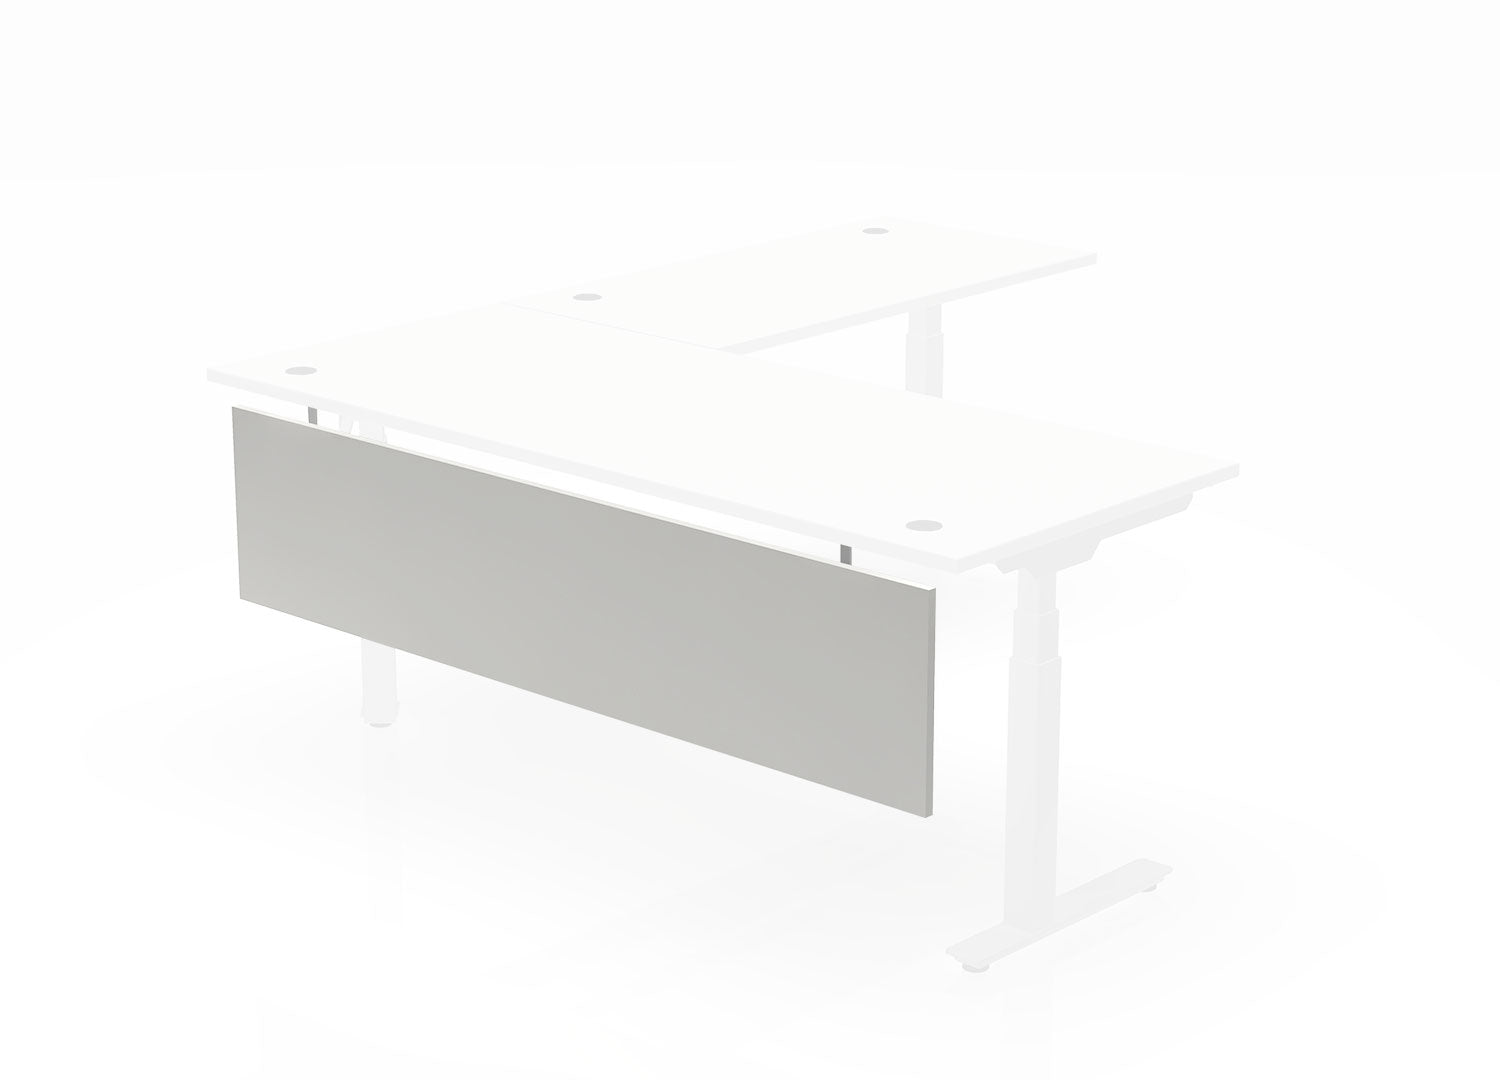 Indigo Series L-Shaped Desk with Modesty Panel and Box Legs | 6x6 | 8 Laminate options